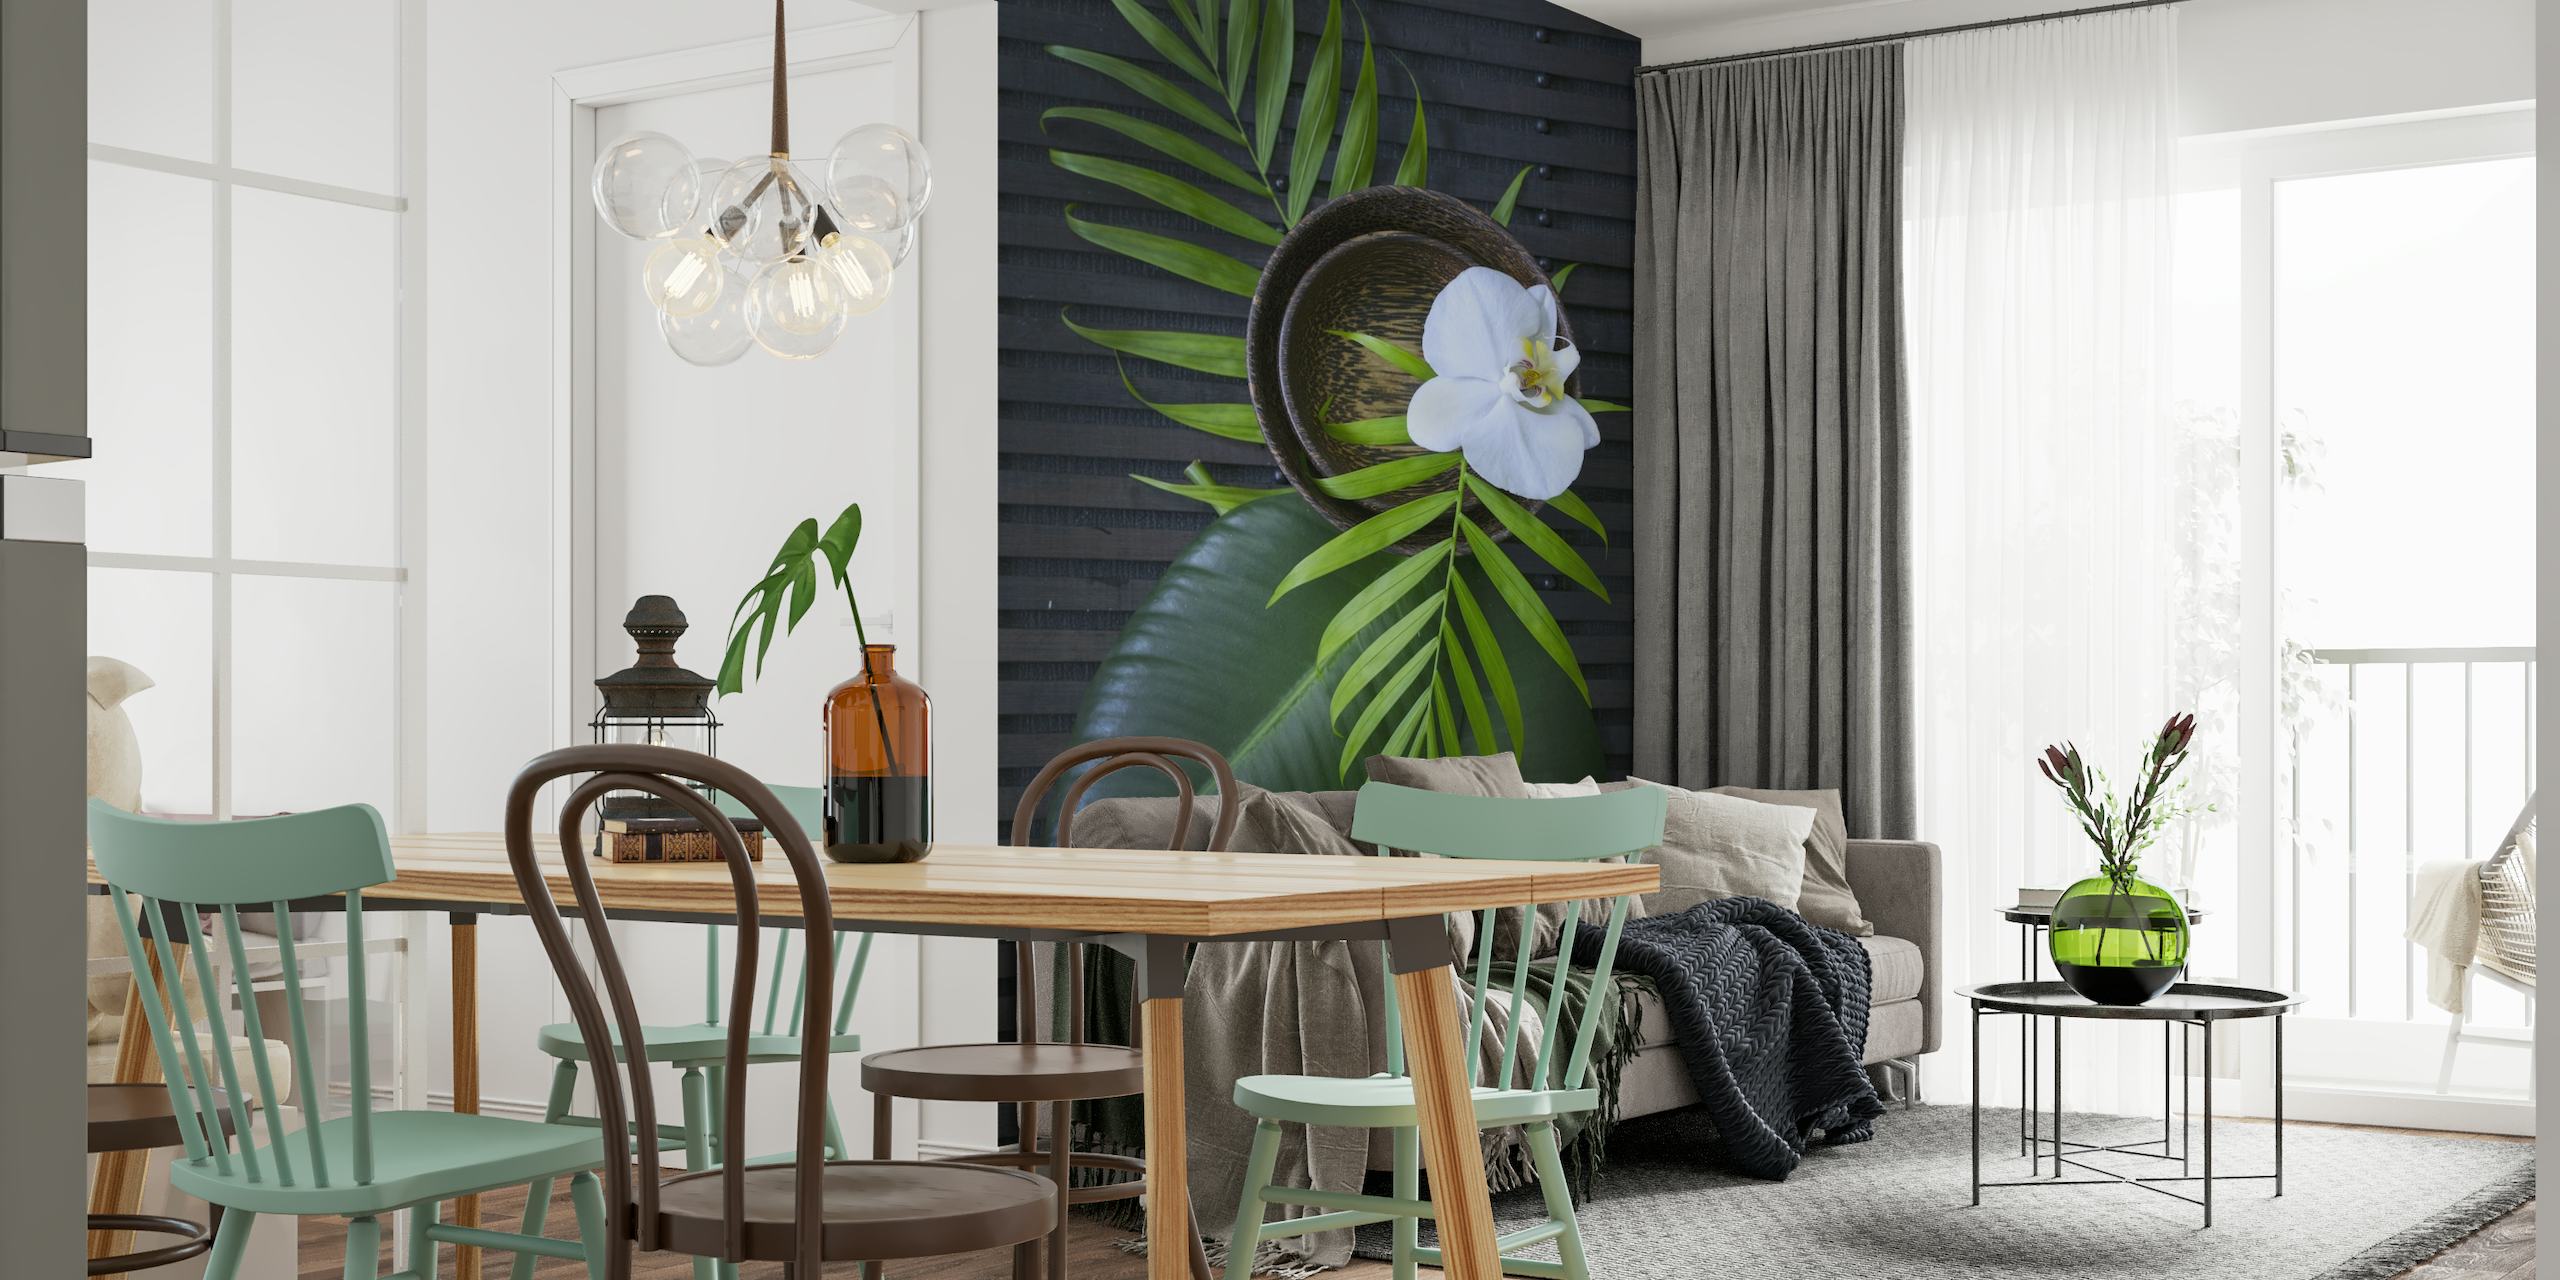 Zen Leaf Orchid Still Life wall mural with white orchid and green leaves